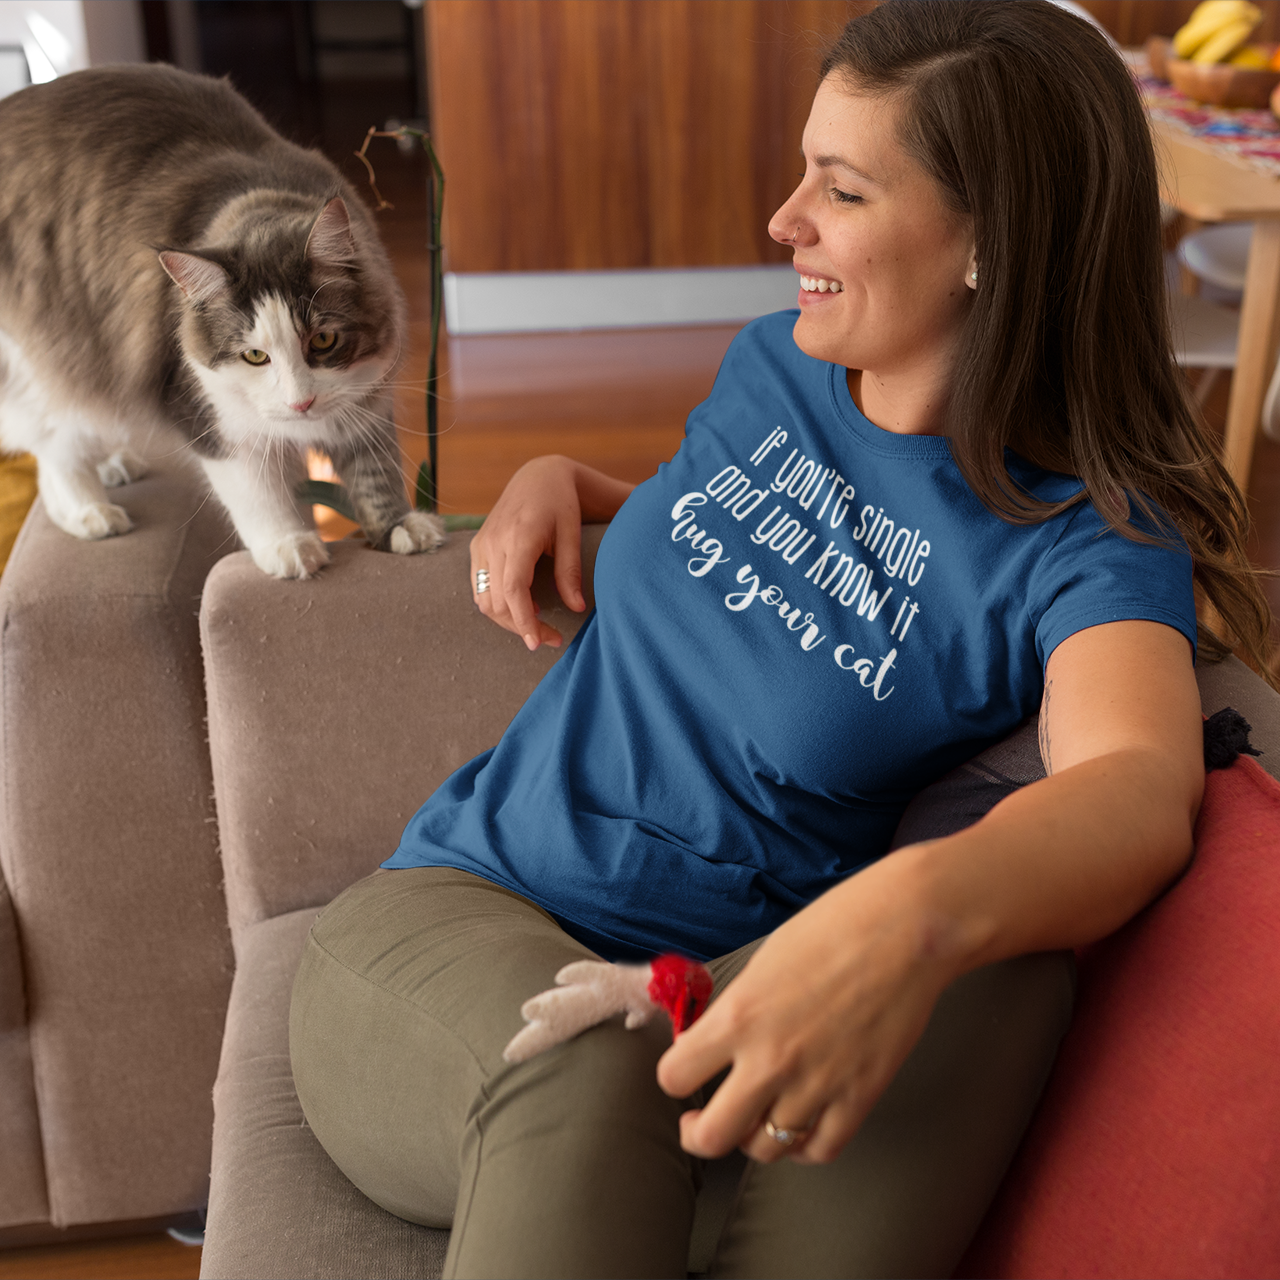 'If you're single and you know it, hug your cat' adult shirt